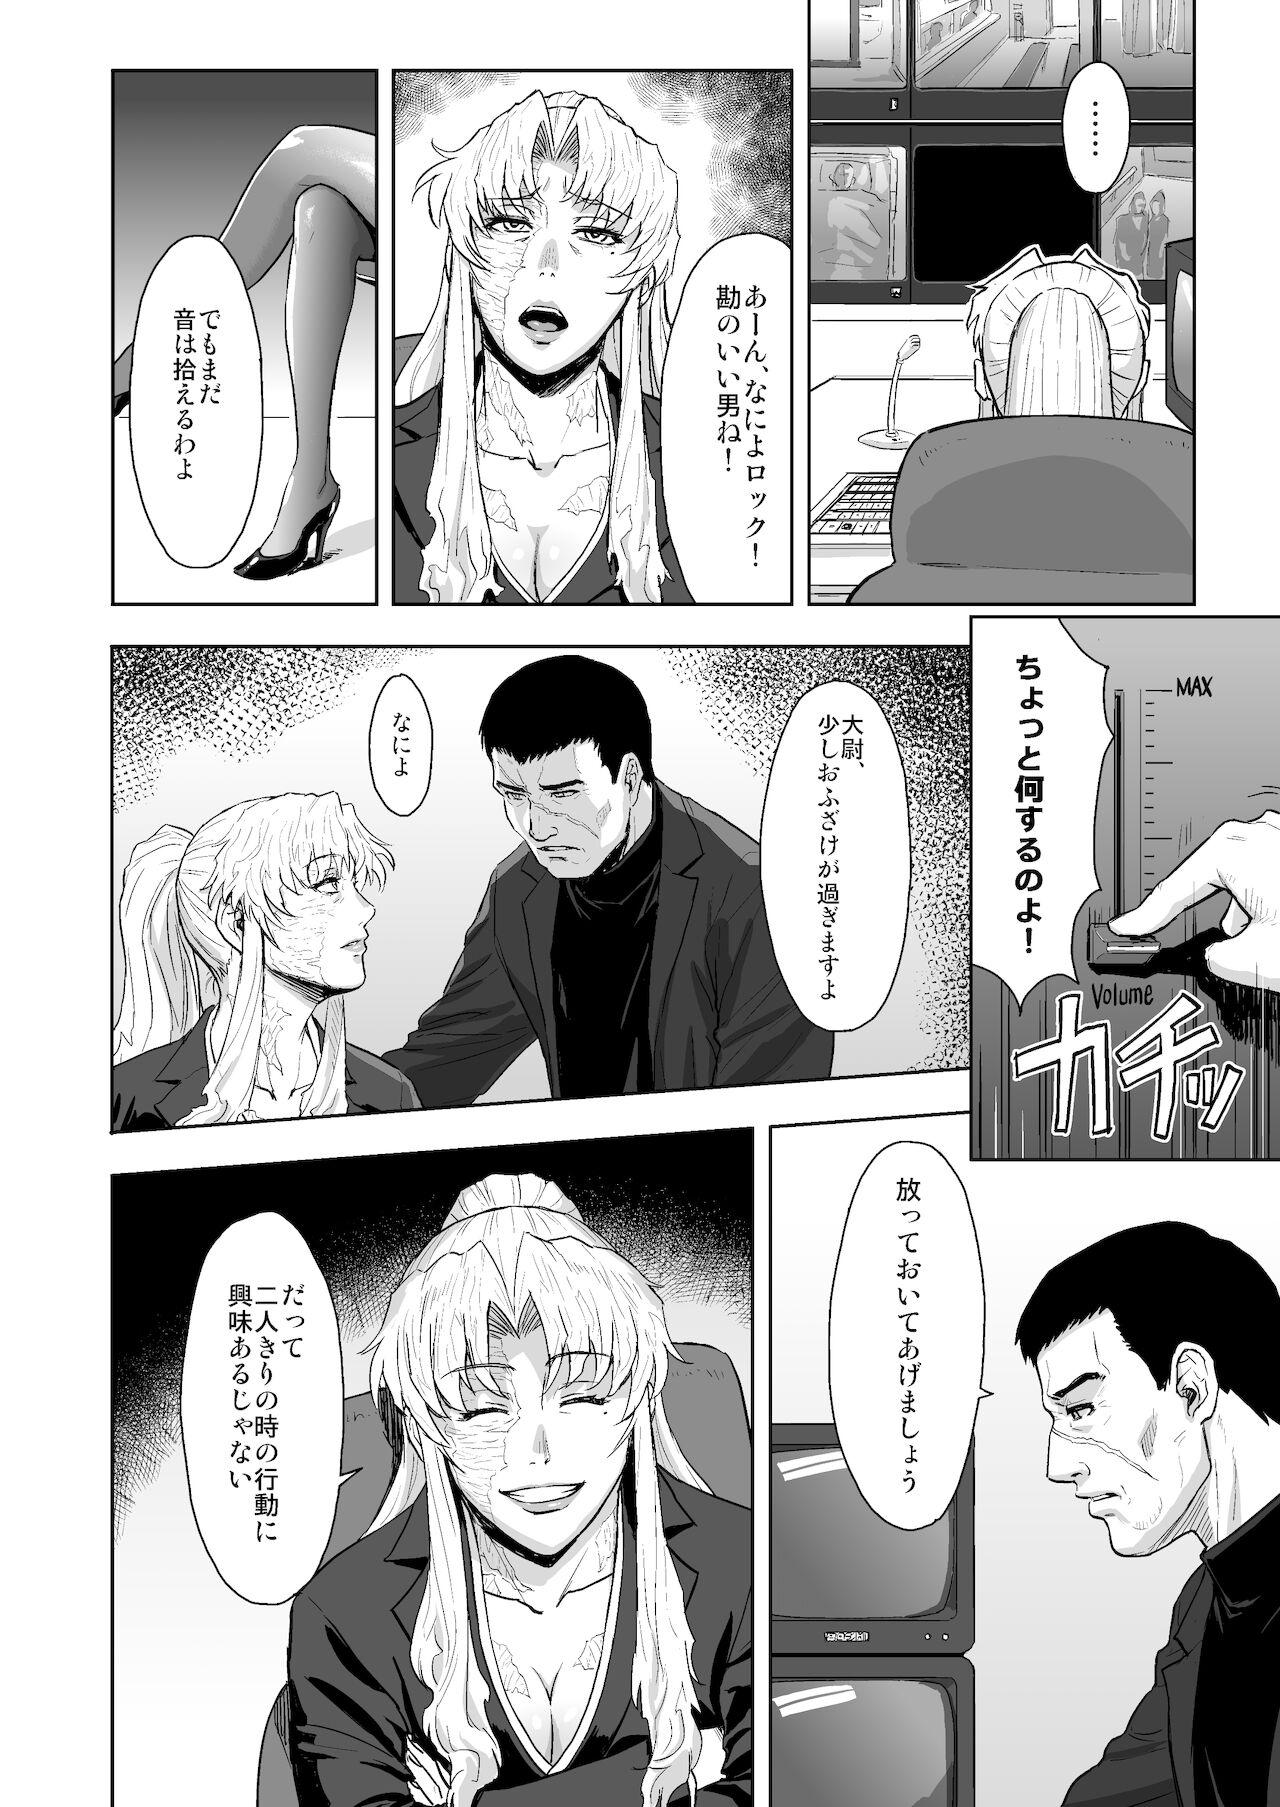 Glamour Honeoridoku - I can't use my hands - Black lagoon Romantic - Page 7